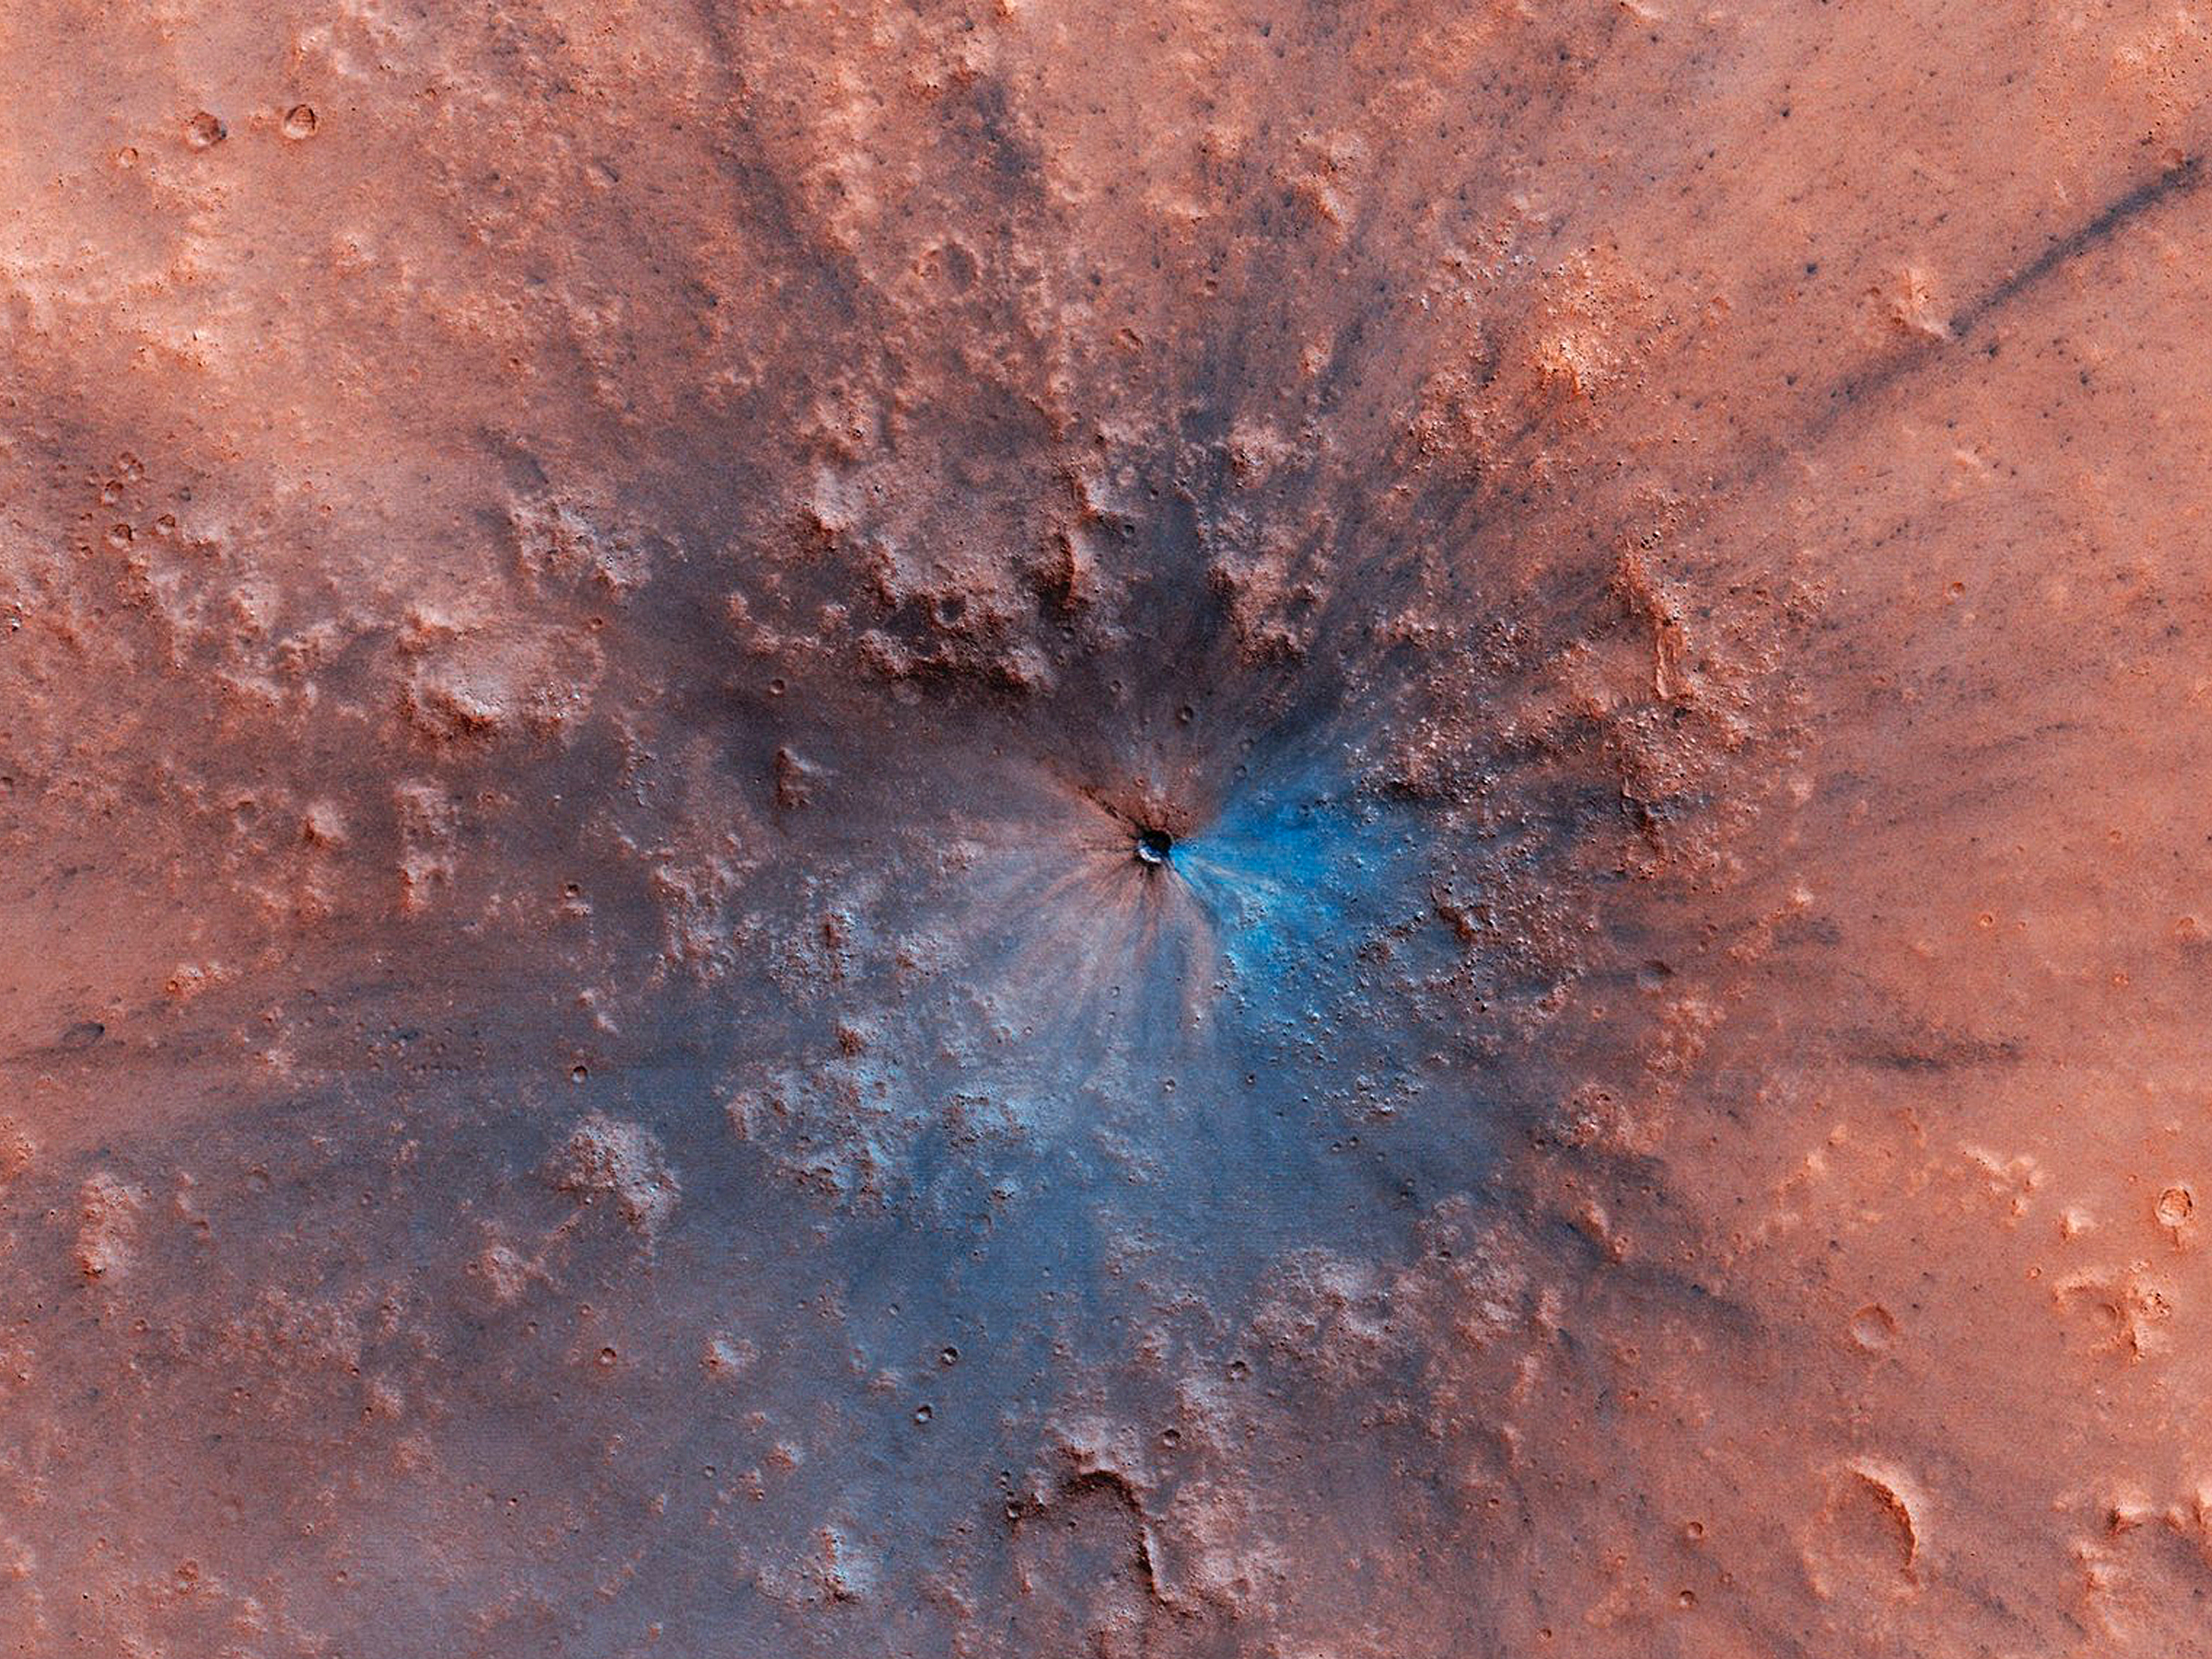 A new crater on Mars, which appeared sometime between September 2016 and February 2019, appears as a dark spot on the landscape in this high-resolution photo from the Mars Reconnaissance Orbiter.